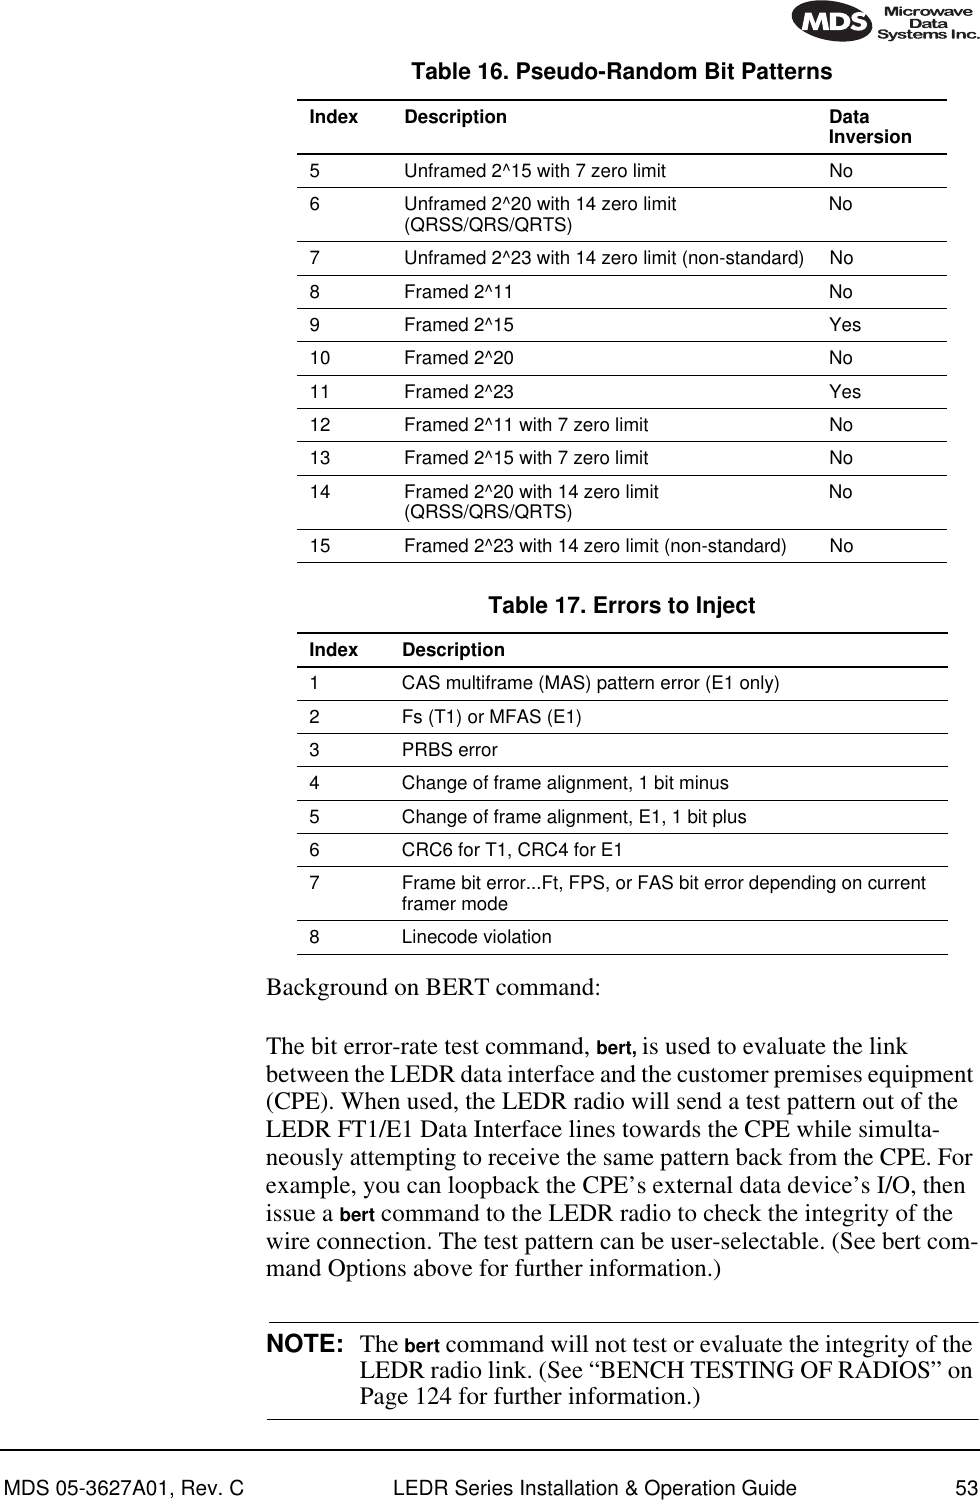 MDS 05-3627A01, Rev. C LEDR Series Installation &amp; Operation Guide 53Background on BERT command:The bit error-rate test command, bert, is used to evaluate the link between the LEDR data interface and the customer premises equipment (CPE). When used, the LEDR radio will send a test pattern out of the LEDR FT1/E1 Data Interface lines towards the CPE while simulta-neously attempting to receive the same pattern back from the CPE. For example, you can loopback the CPE’s external data device’s I/O, then issue a bert command to the LEDR radio to check the integrity of the wire connection. The test pattern can be user-selectable. (See bert com-mand Options above for further information.)NOTE: The bert command will not test or evaluate the integrity of the LEDR radio link. (See “BENCH TESTING OF RADIOS” on Page 124 for further information.)5 Unframed 2^15 with 7 zero limit No6 Unframed 2^20 with 14 zero limit (QRSS/QRS/QRTS) No7 Unframed 2^23 with 14 zero limit (non-standard) No8 Framed 2^11 No9 Framed 2^15 Yes10 Framed 2^20 No11 Framed 2^23 Yes12 Framed 2^11 with 7 zero limit No13 Framed 2^15 with 7 zero limit No14 Framed 2^20 with 14 zero limit (QRSS/QRS/QRTS) No15 Framed 2^23 with 14 zero limit (non-standard) NoTable 16. Pseudo-Random Bit PatternsIndex Description Data InversionTable 17. Errors to Inject  Index Description1 CAS multiframe (MAS) pattern error (E1 only)2 Fs (T1) or MFAS (E1)3 PRBS error4 Change of frame alignment, 1 bit minus5 Change of frame alignment, E1, 1 bit plus6 CRC6 for T1, CRC4 for E17 Frame bit error...Ft, FPS, or FAS bit error depending on current framer mode8 Linecode violation